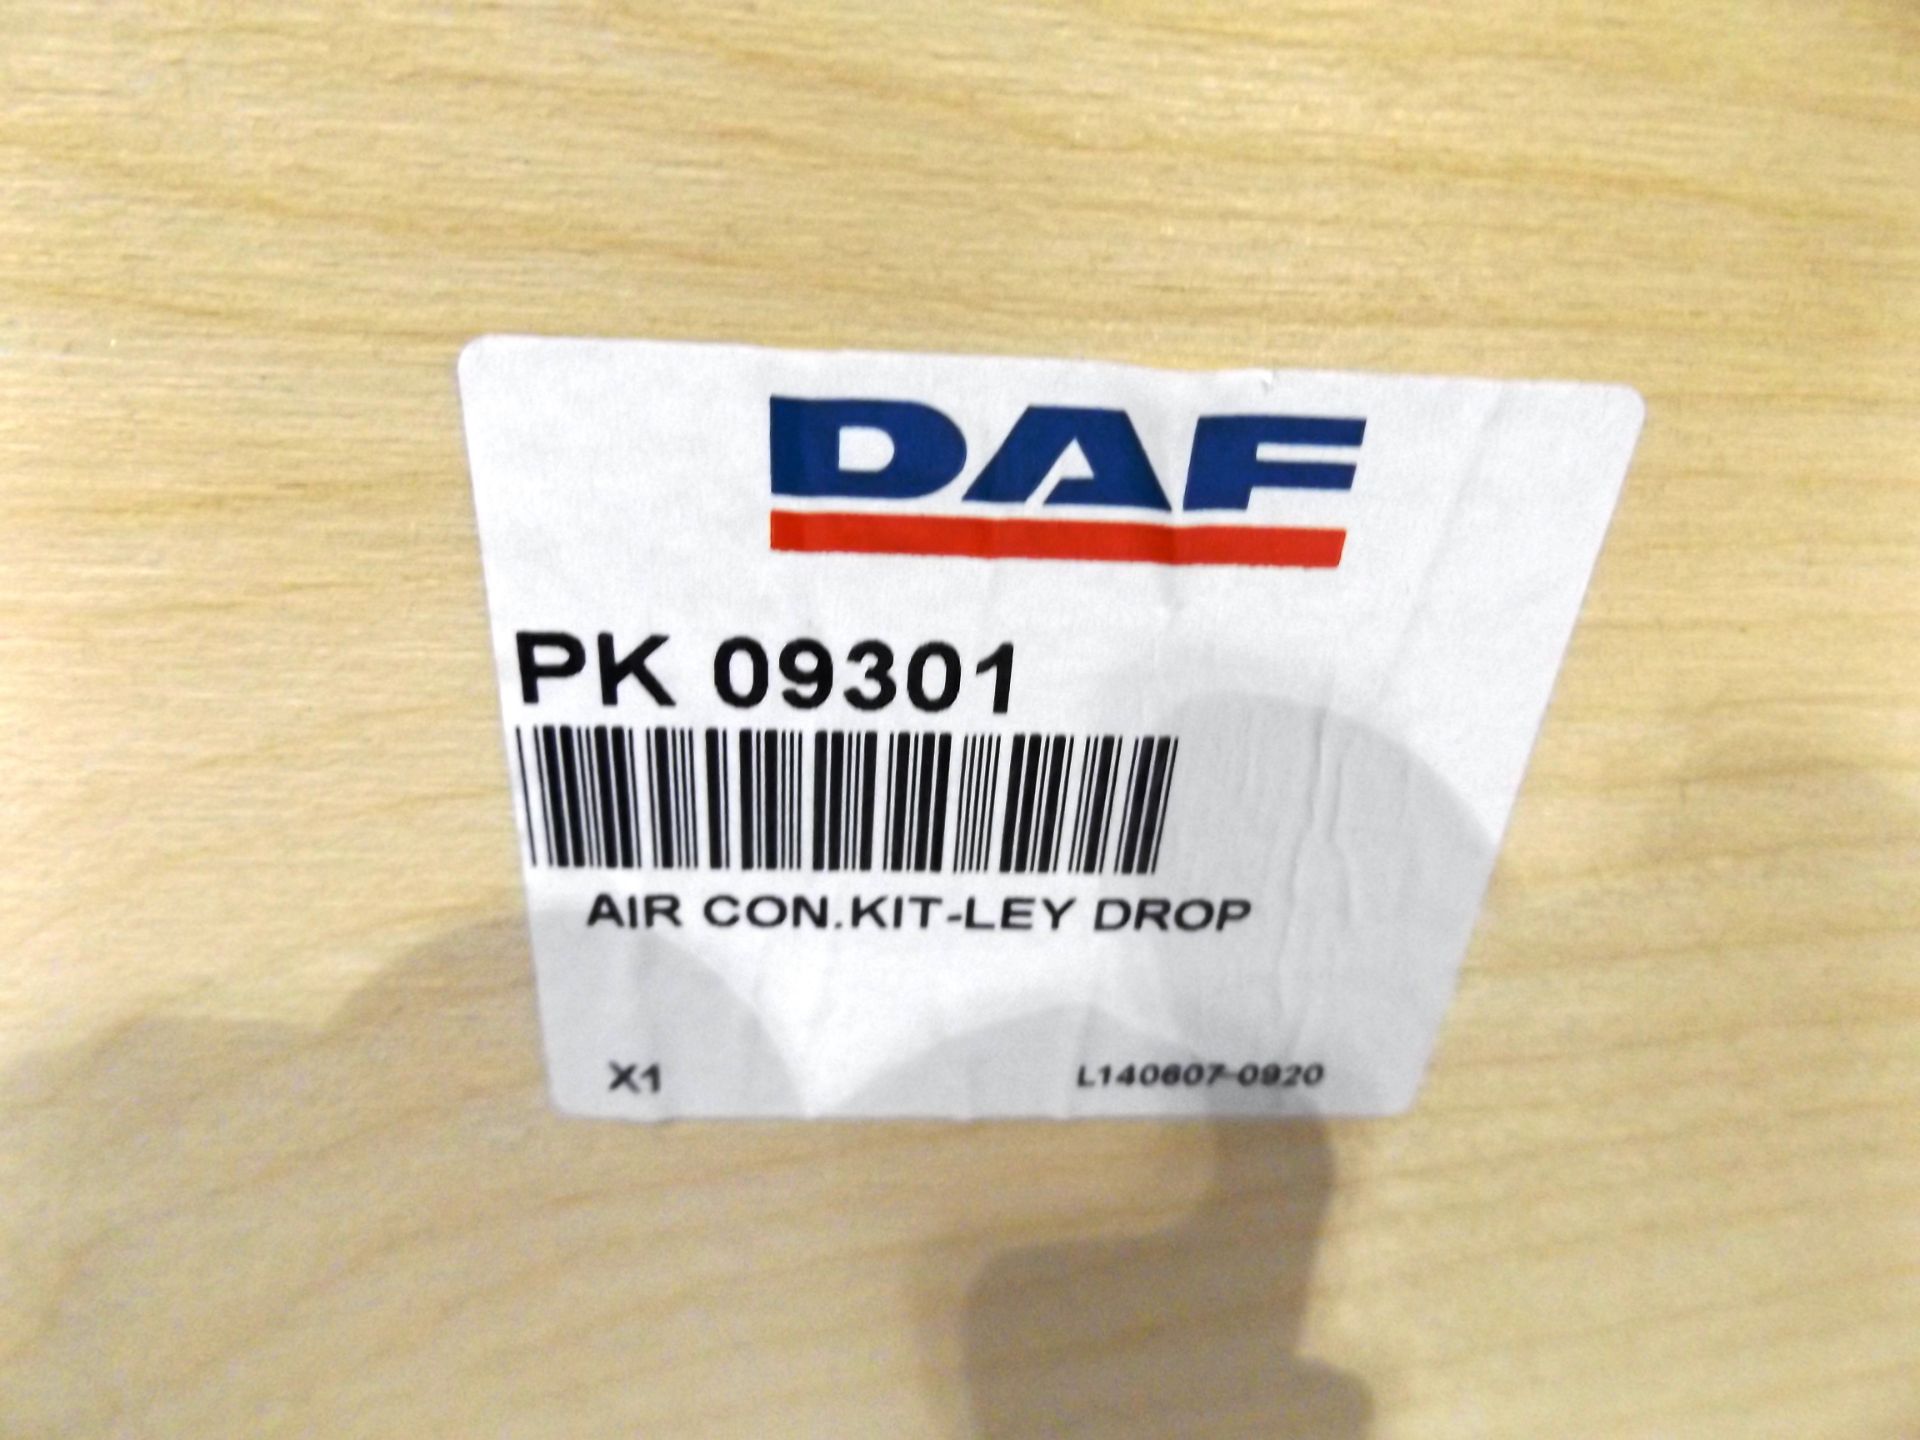 DAF Drops Air Conditioning Kit - Image 11 of 12